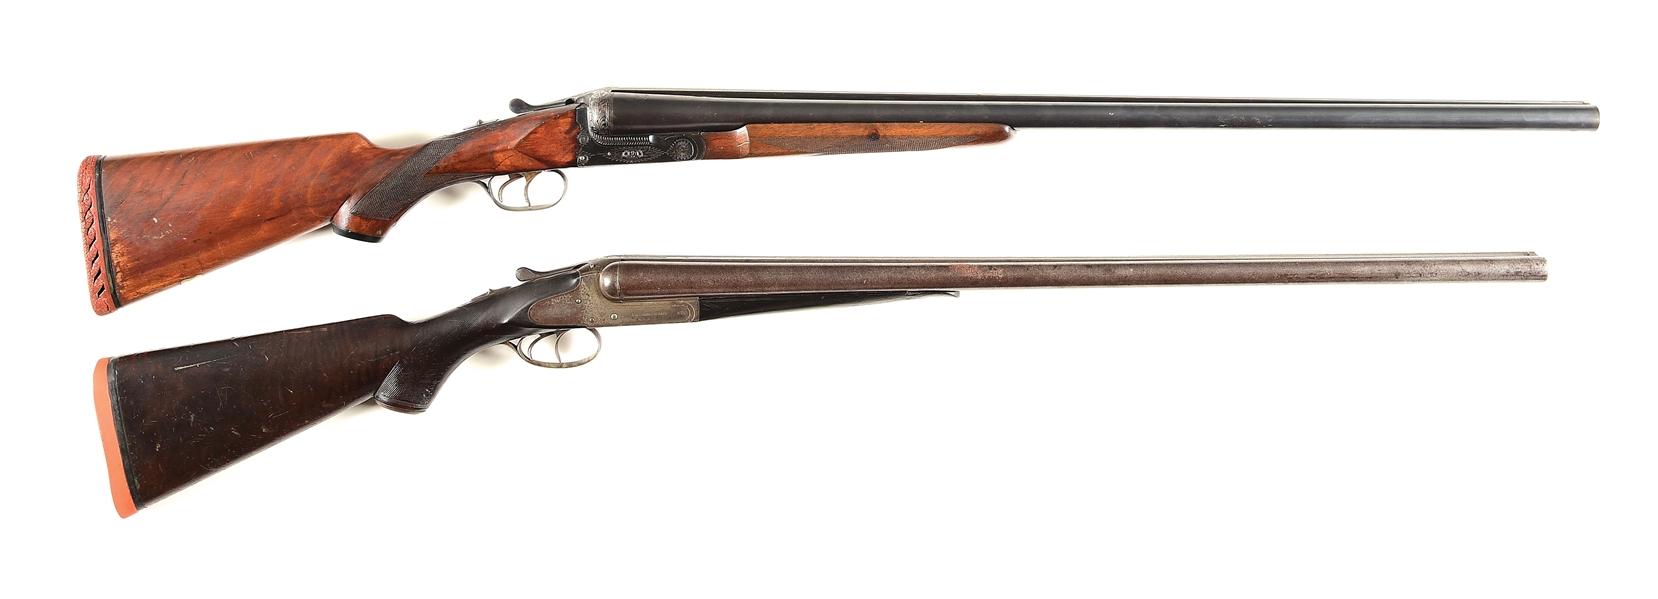 (M) LOT OF 2: MARTIN AMUATEOUL AND THE CONTINENTAL SIDE BY SIDE SHOTGUNS.